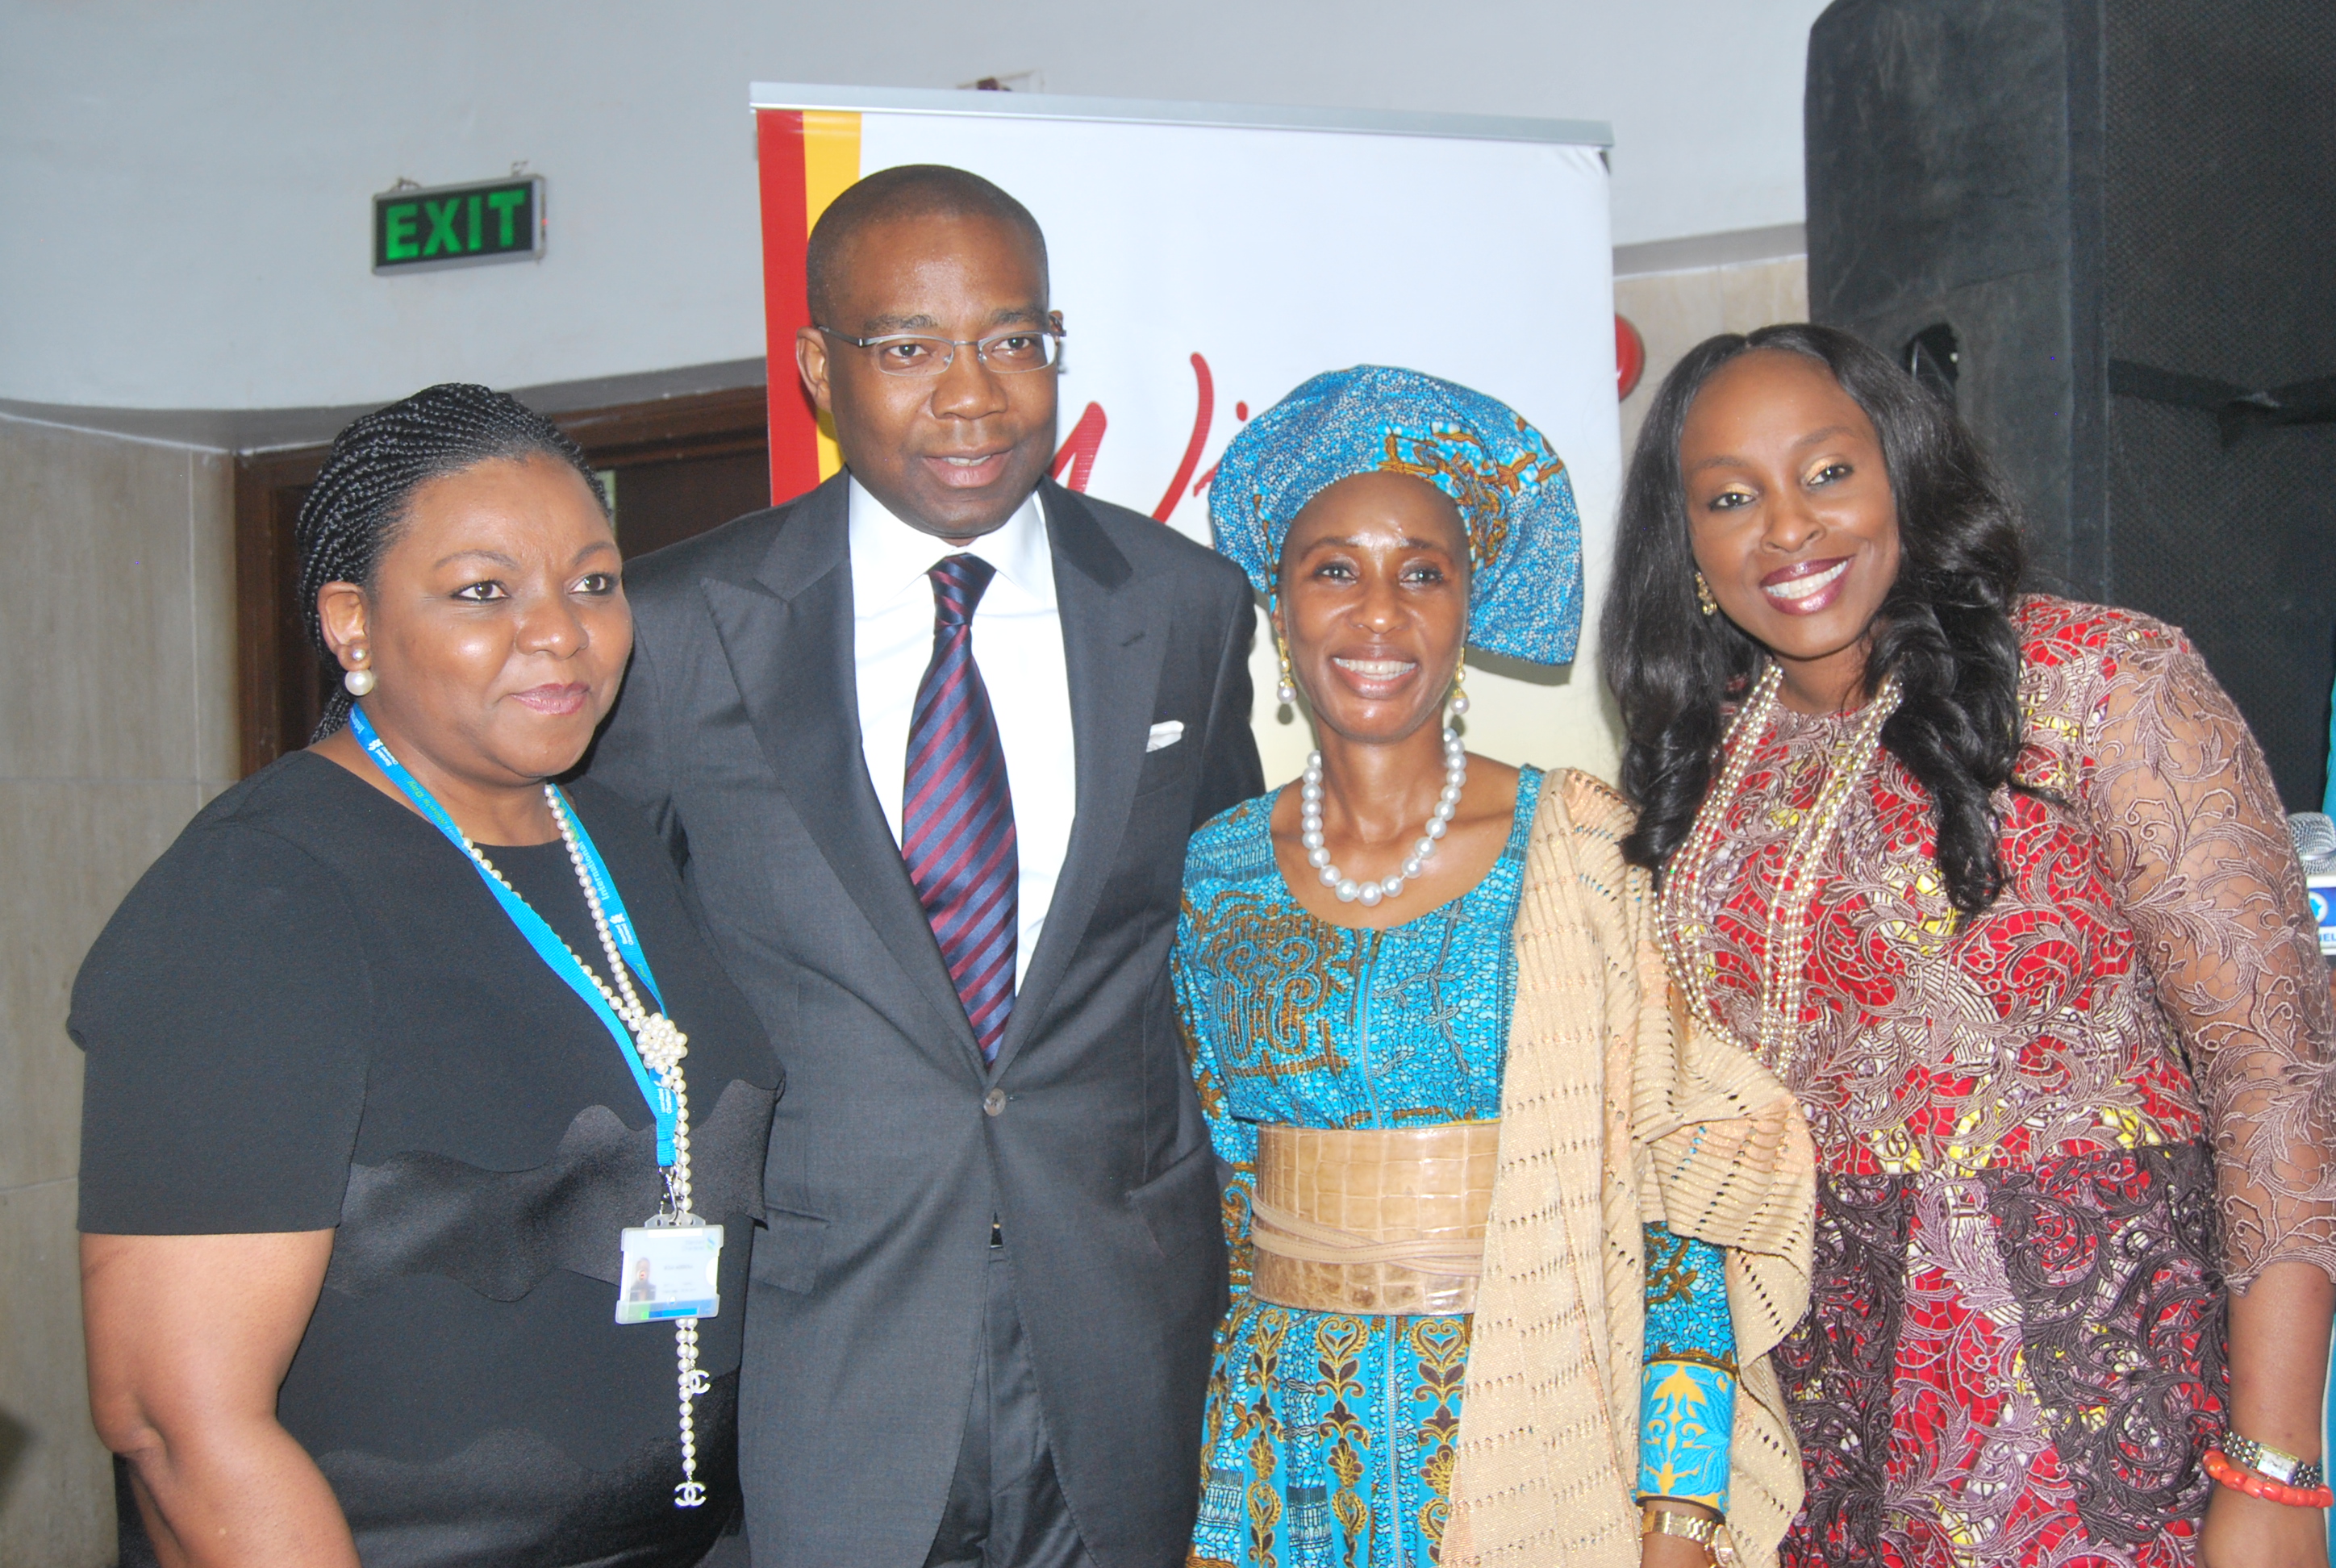 From left: Mrs Bola Adesola, MD/CEO, Standard Chartered Bank; Mr Aigboje Aig-Imoukhuede, President of the Council, Nigerian Stock Exchange;  Ms. Evelyn Oputu, former MD/CEO, Bank of Industry; and  Chairperson, WimBiz, Osayi Alile at the 2015 WimBiz Annual Lecture in Lagos.